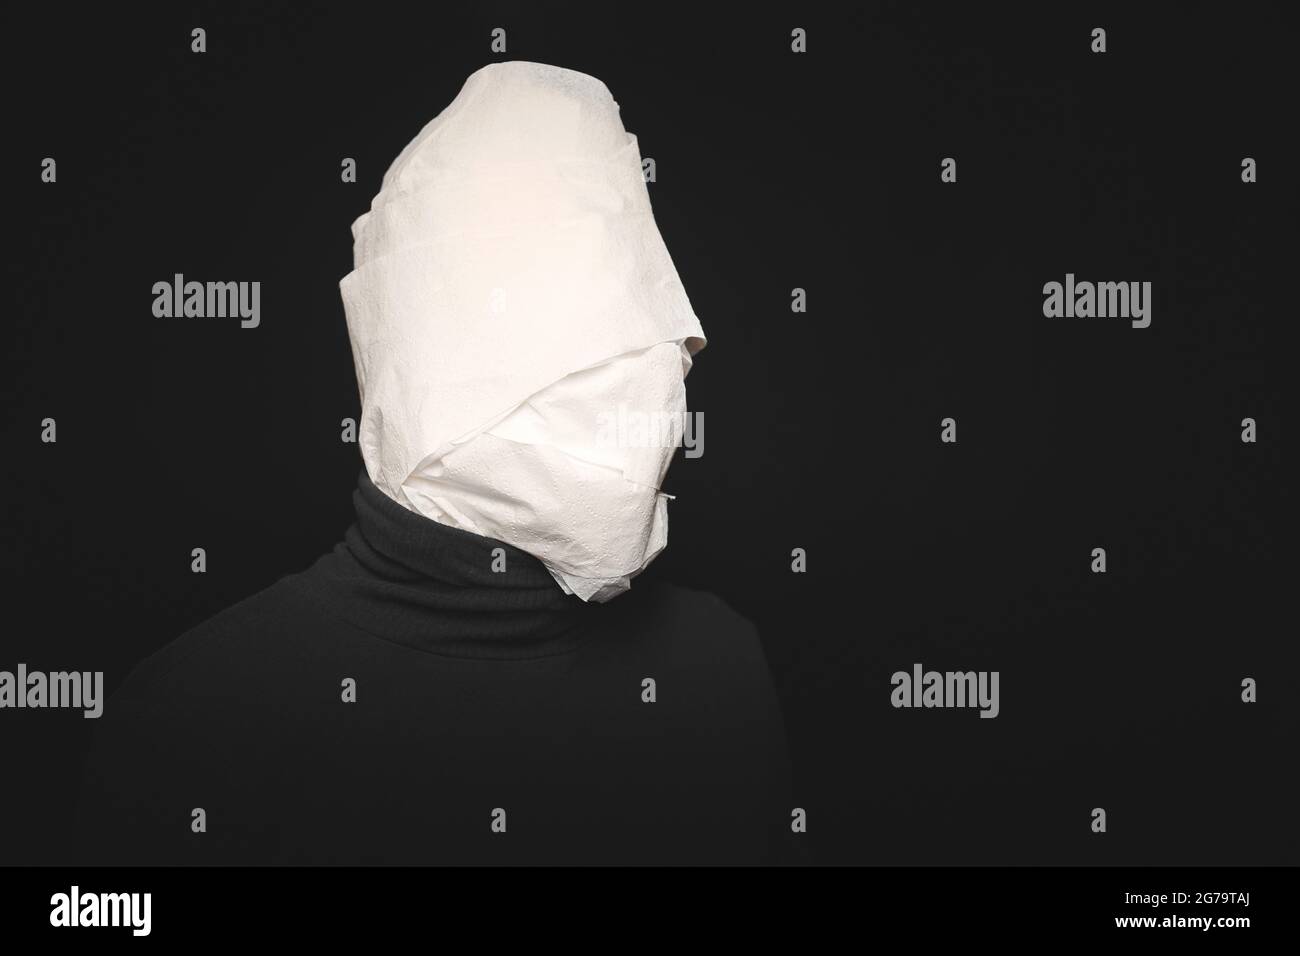 Head wrapped in toilet paper. Funny man, black background. Mummy, stupid dummy, mental health concept. Stock Photo